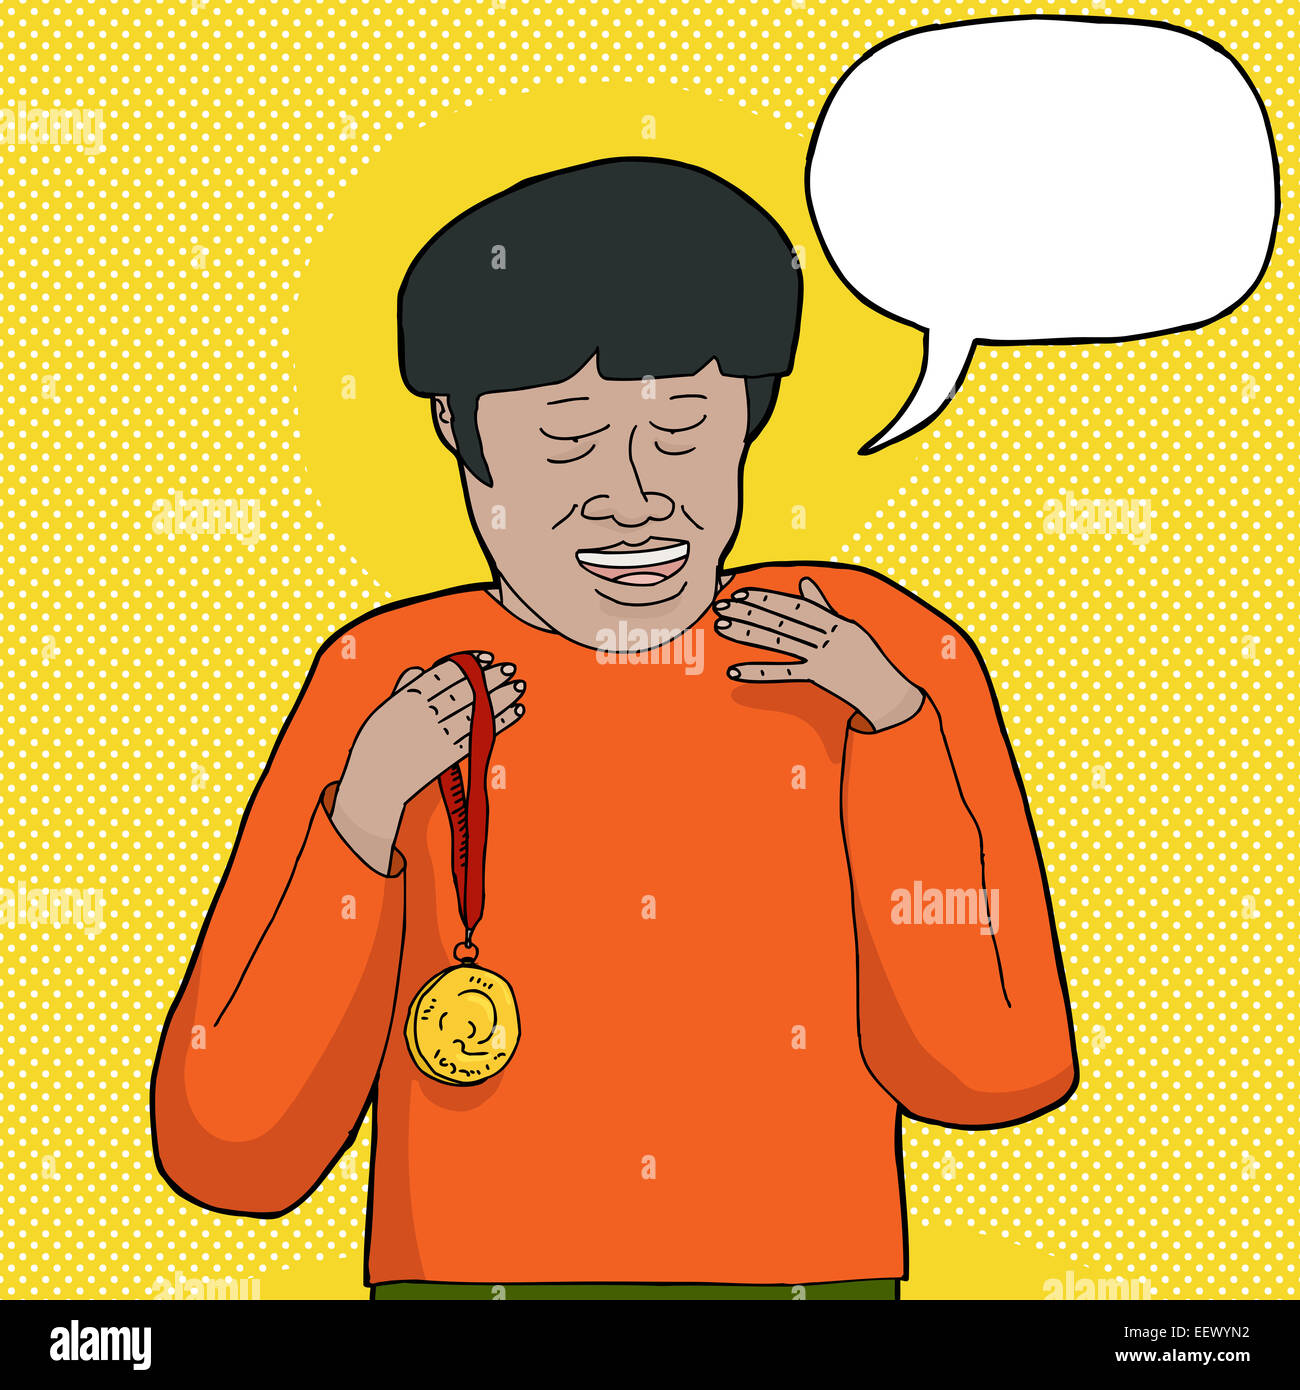 Happy man with gold medal and word bubble Stock Photo